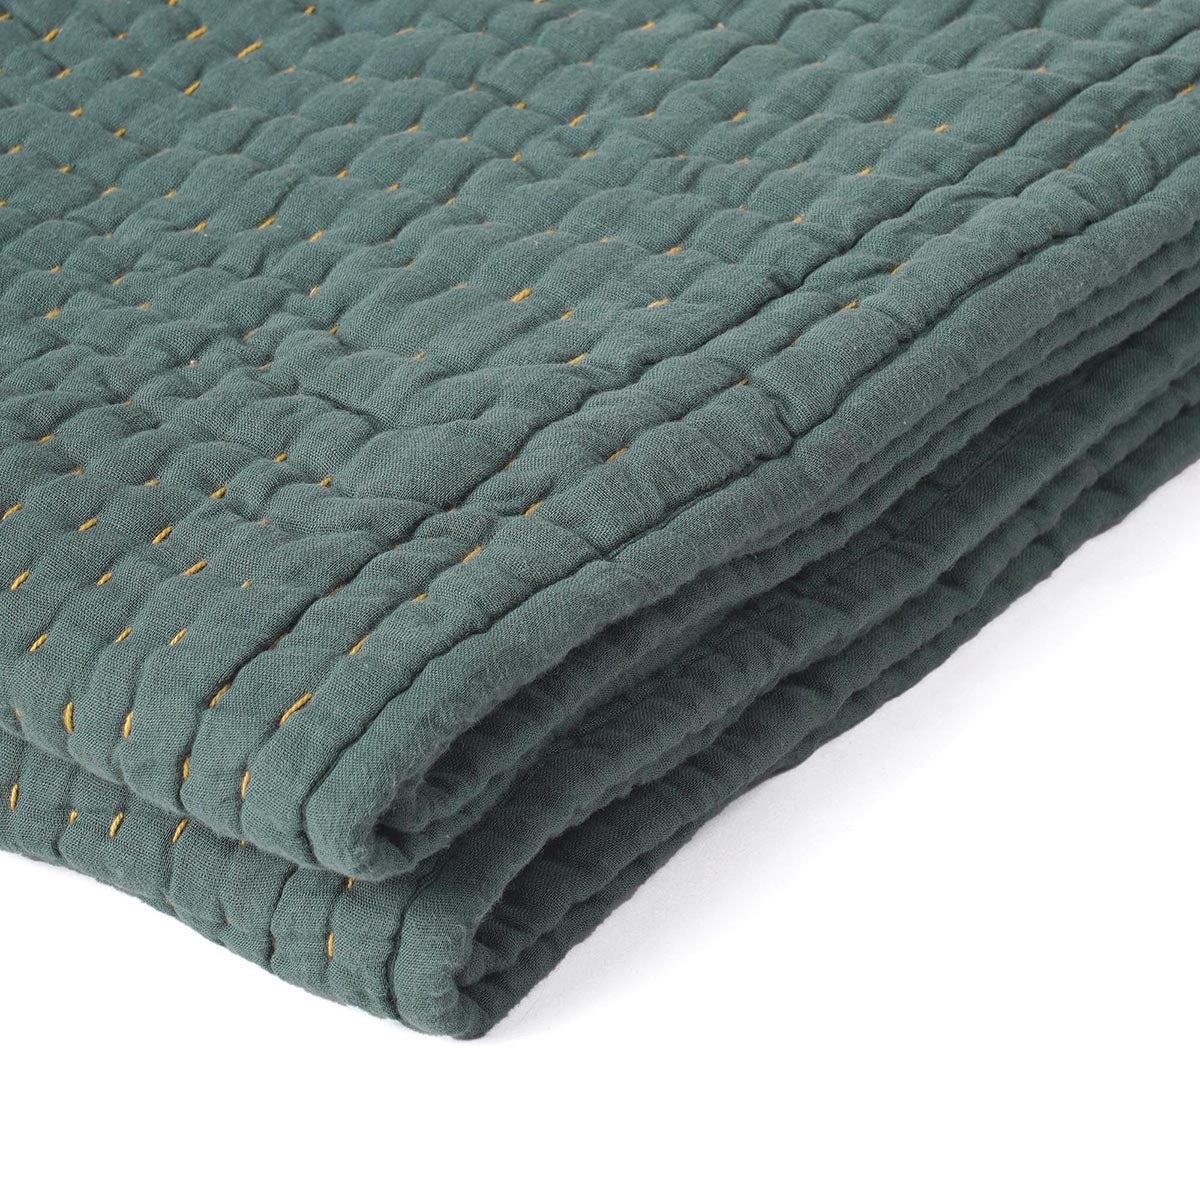 Olive colour muslin gauze hand quilted Throw blanket, simple stripe quilting, 100% cotton, 50X60 inches